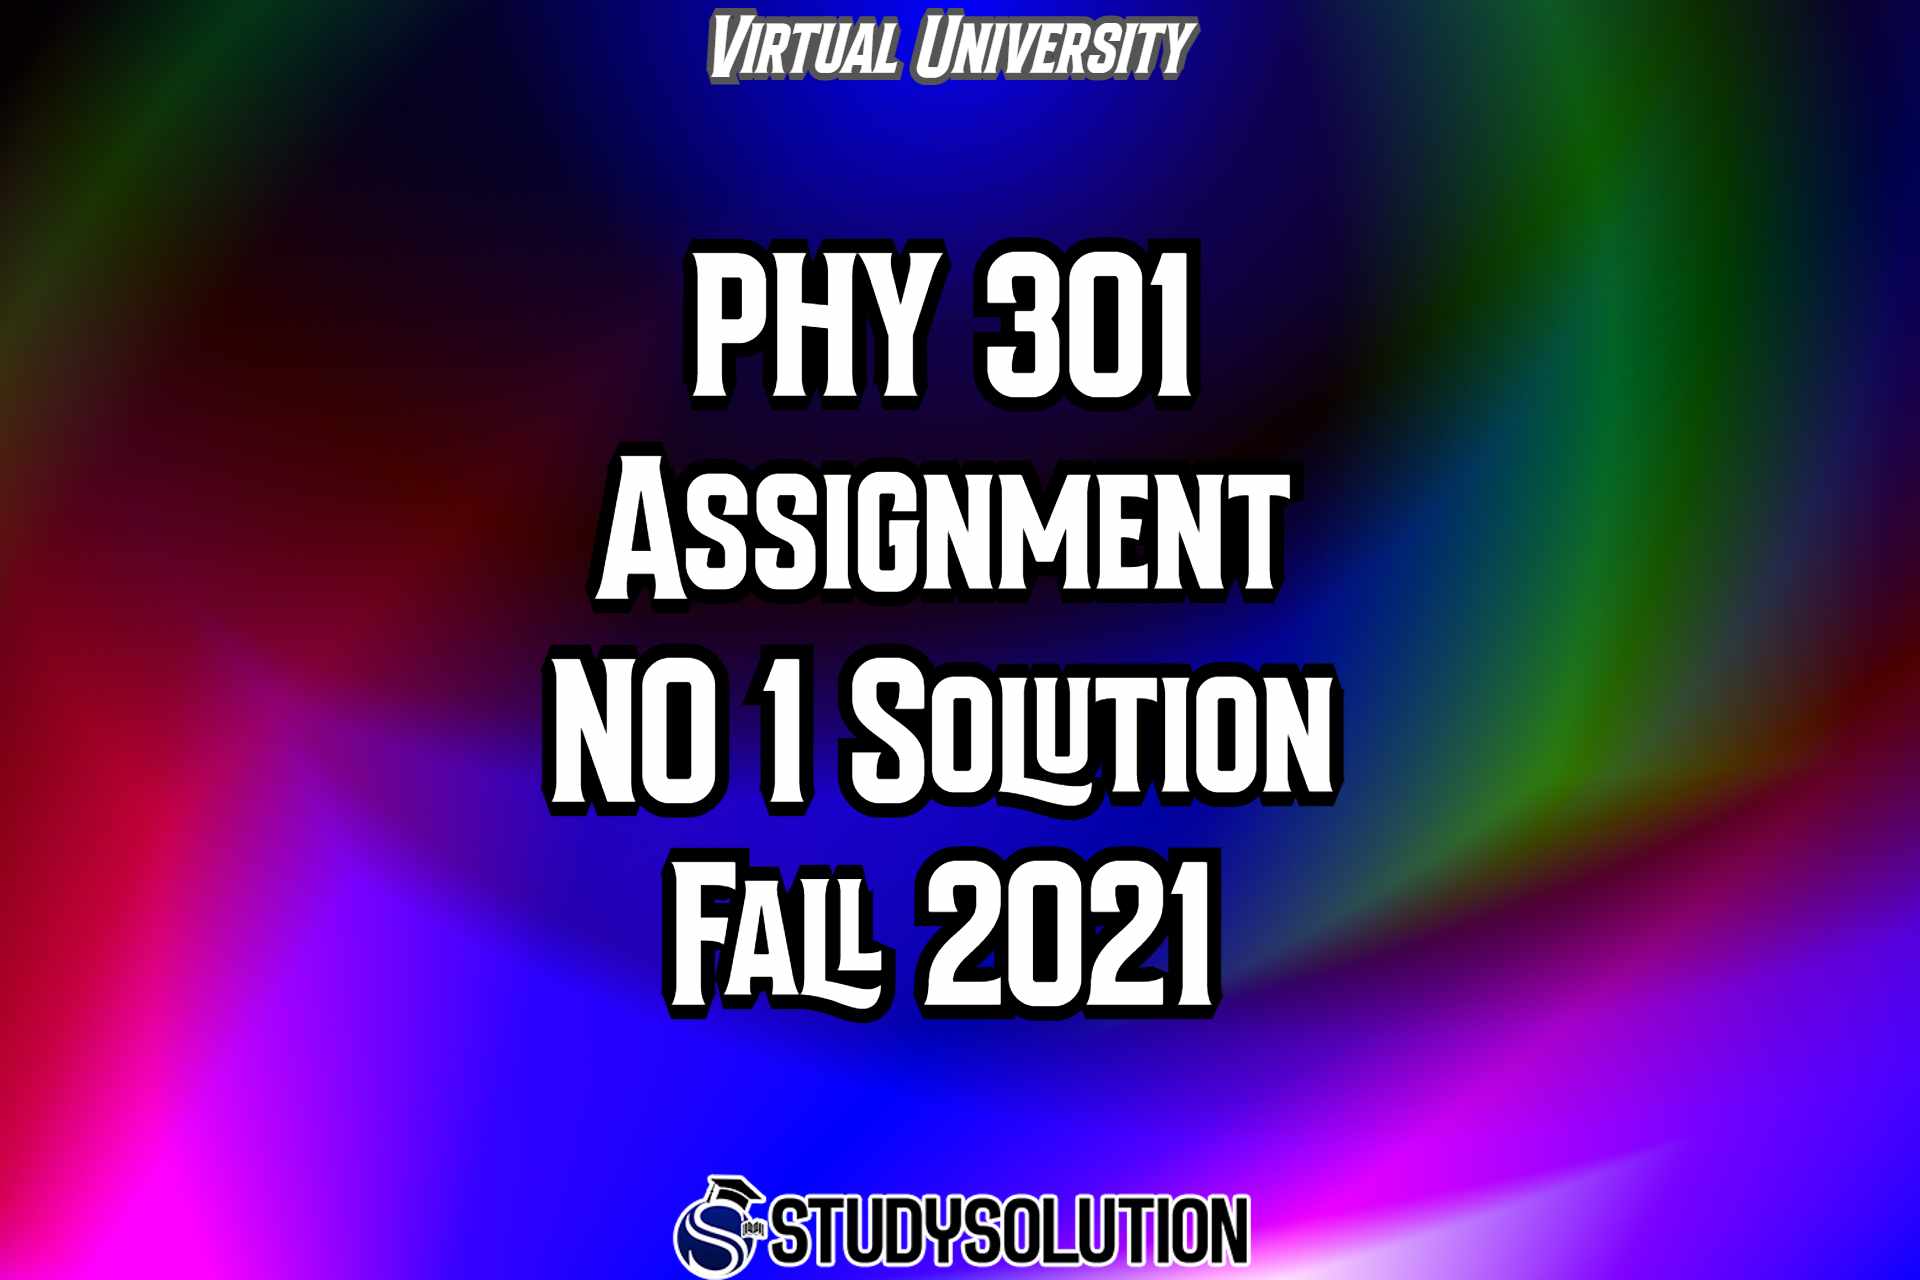 PHY301 Assignment NO 1 Solution Fall 2021